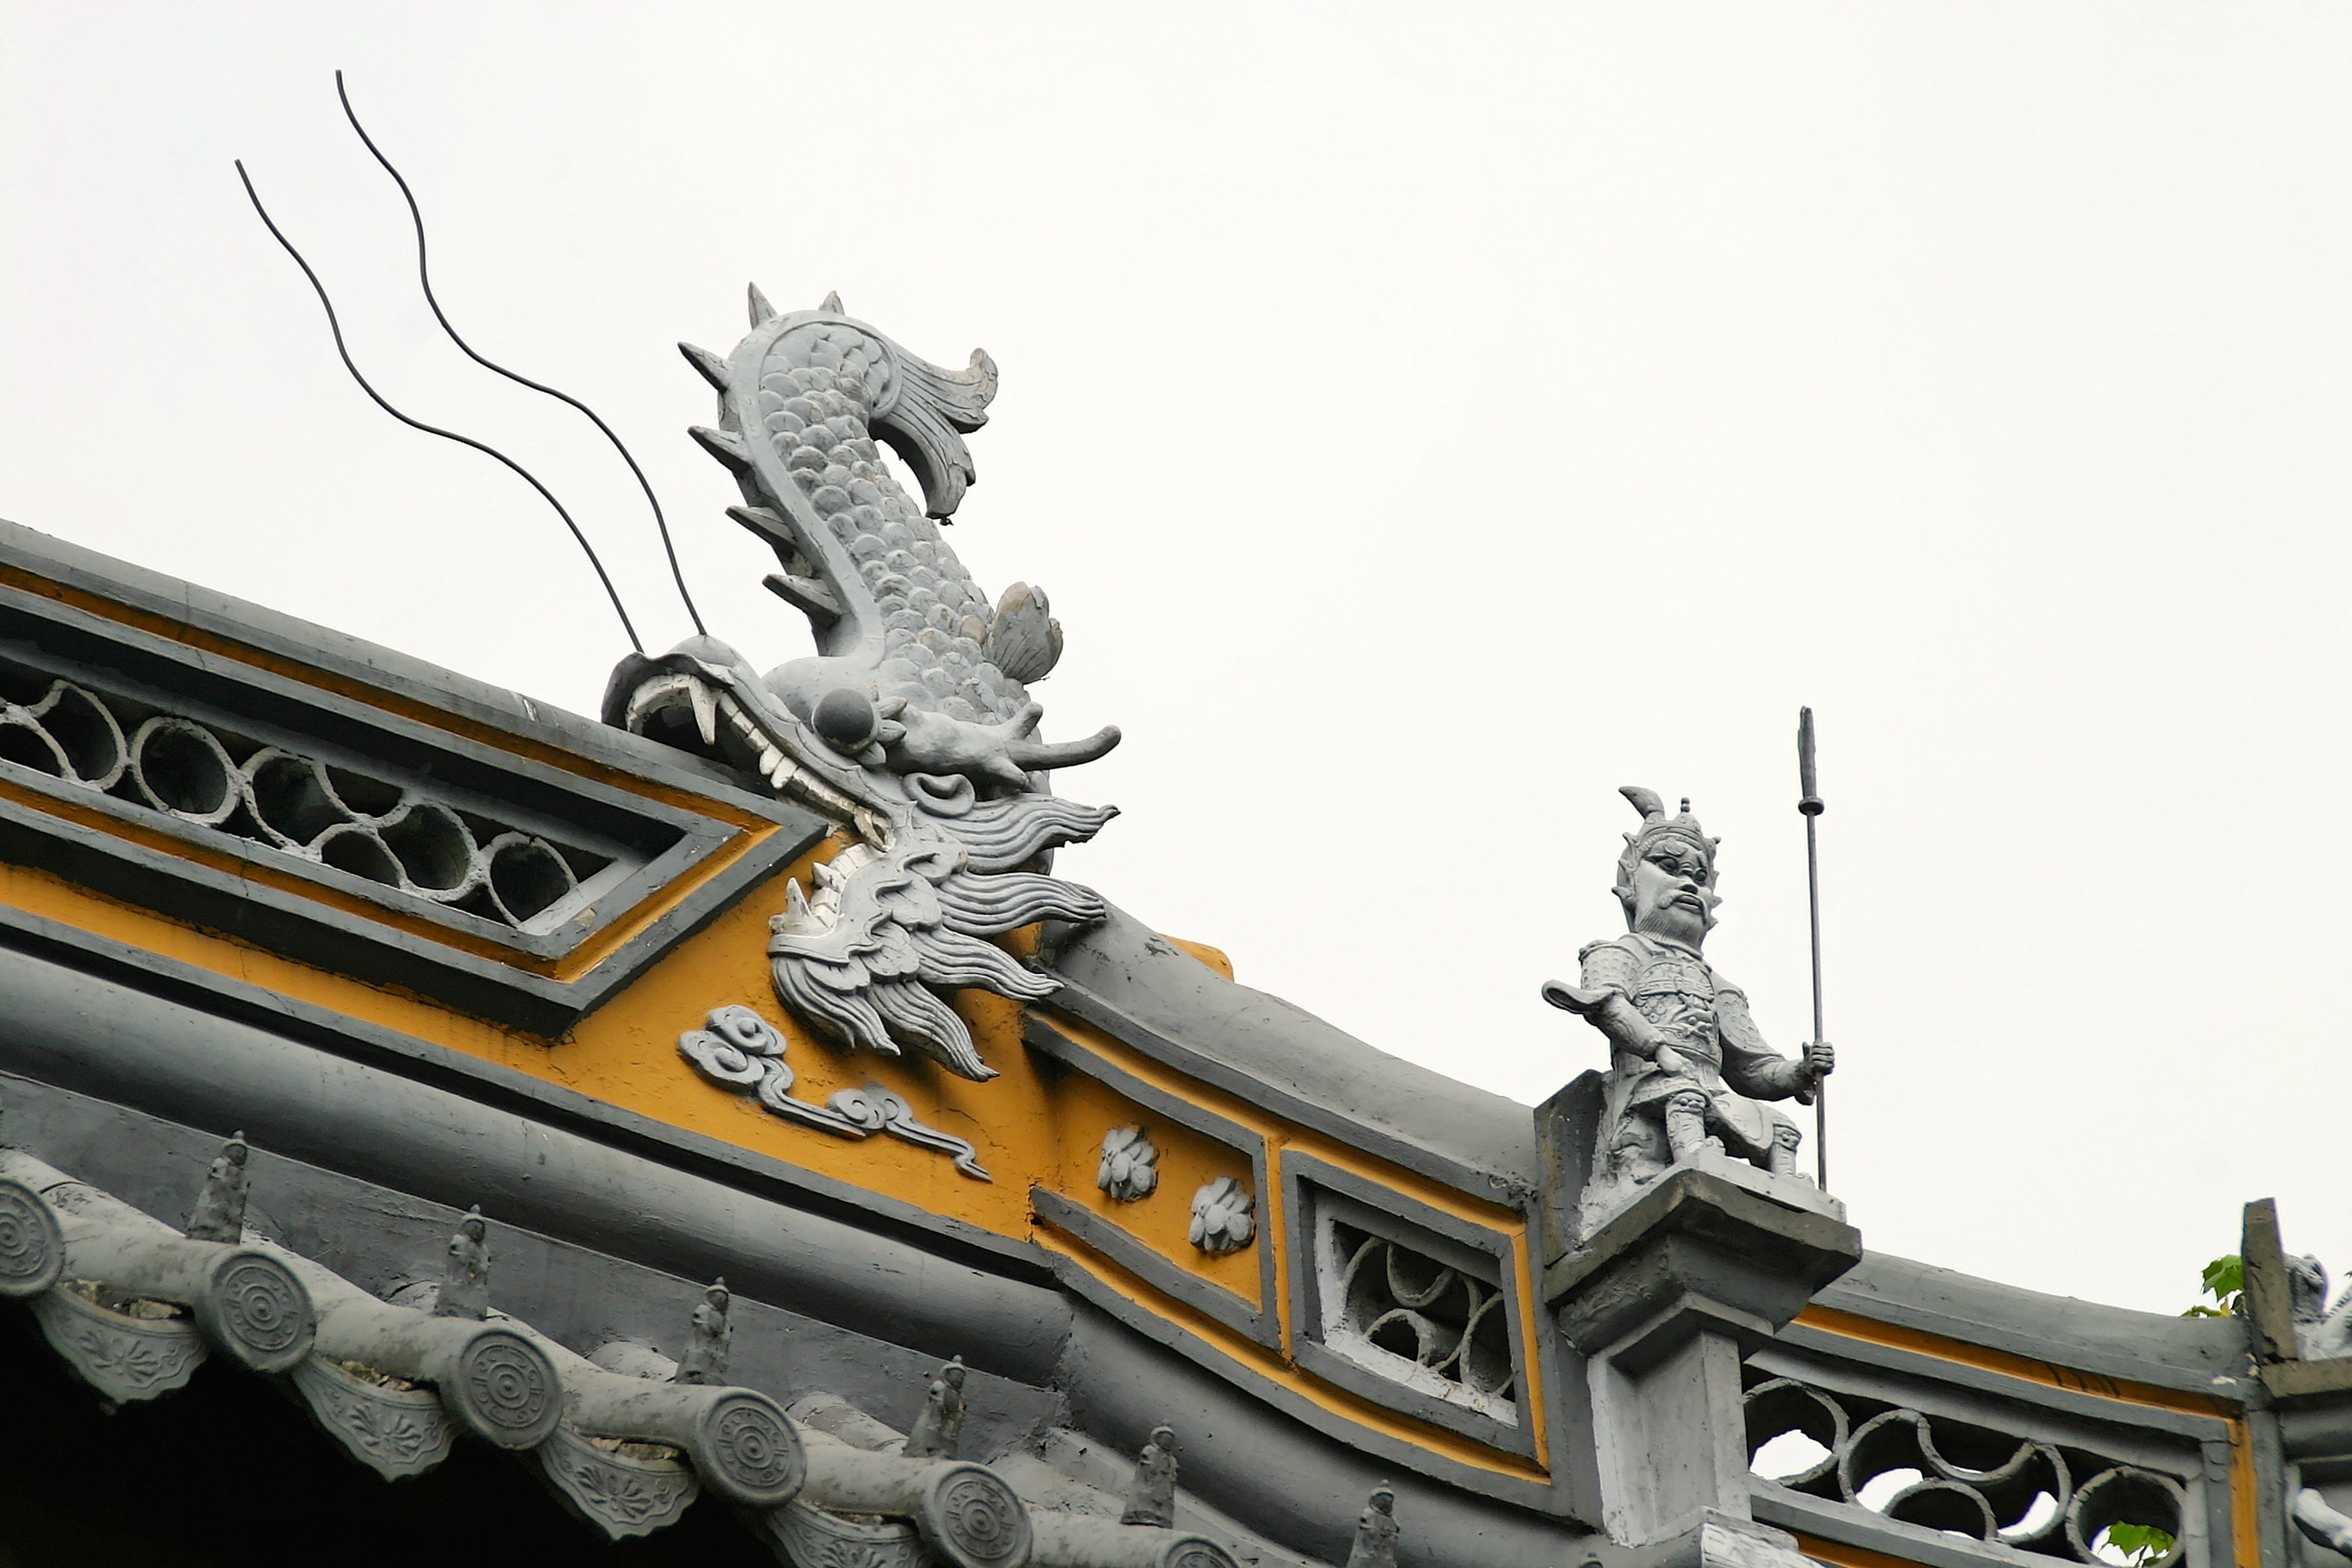 Roof, China, Dragon, Forbidden City, architecture, statue